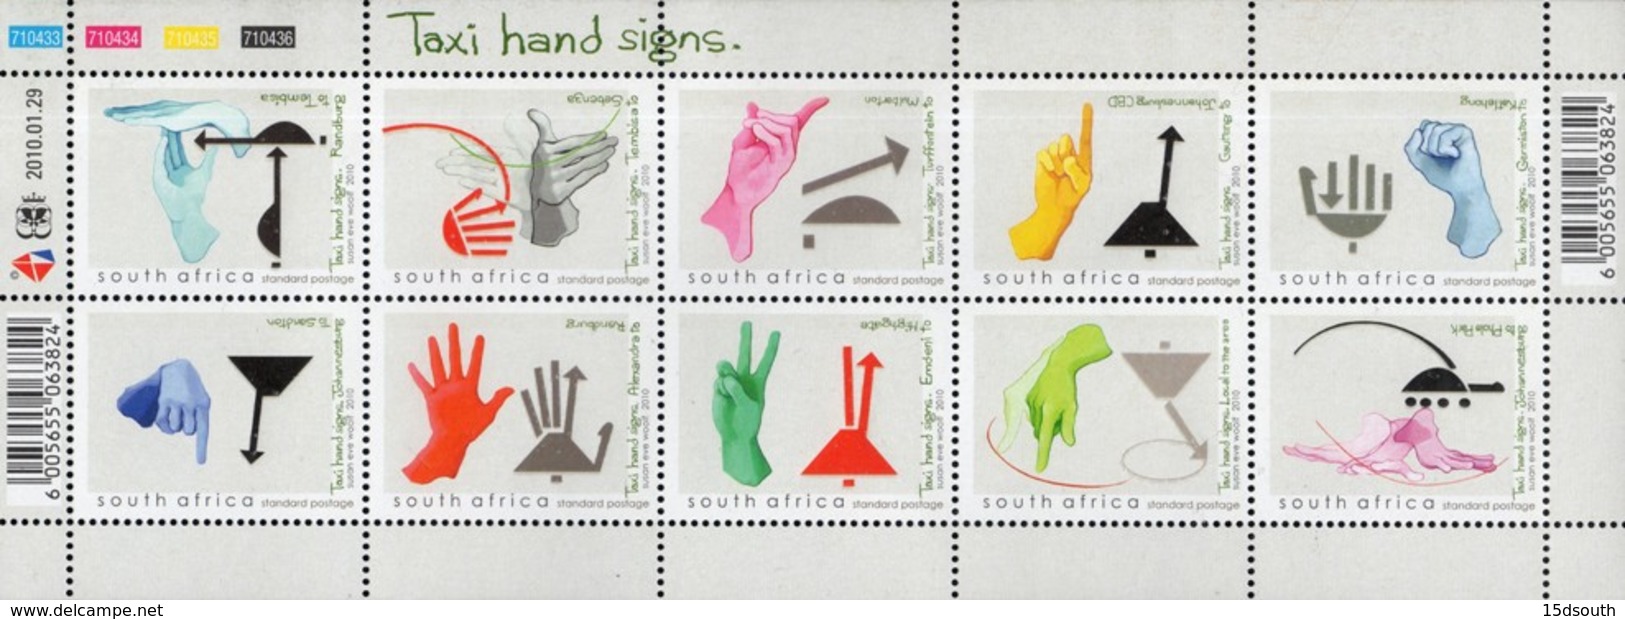 South Africa - 2010 Taxi Hand Signs Sheet (**) # SG 1744a - Other (Earth)